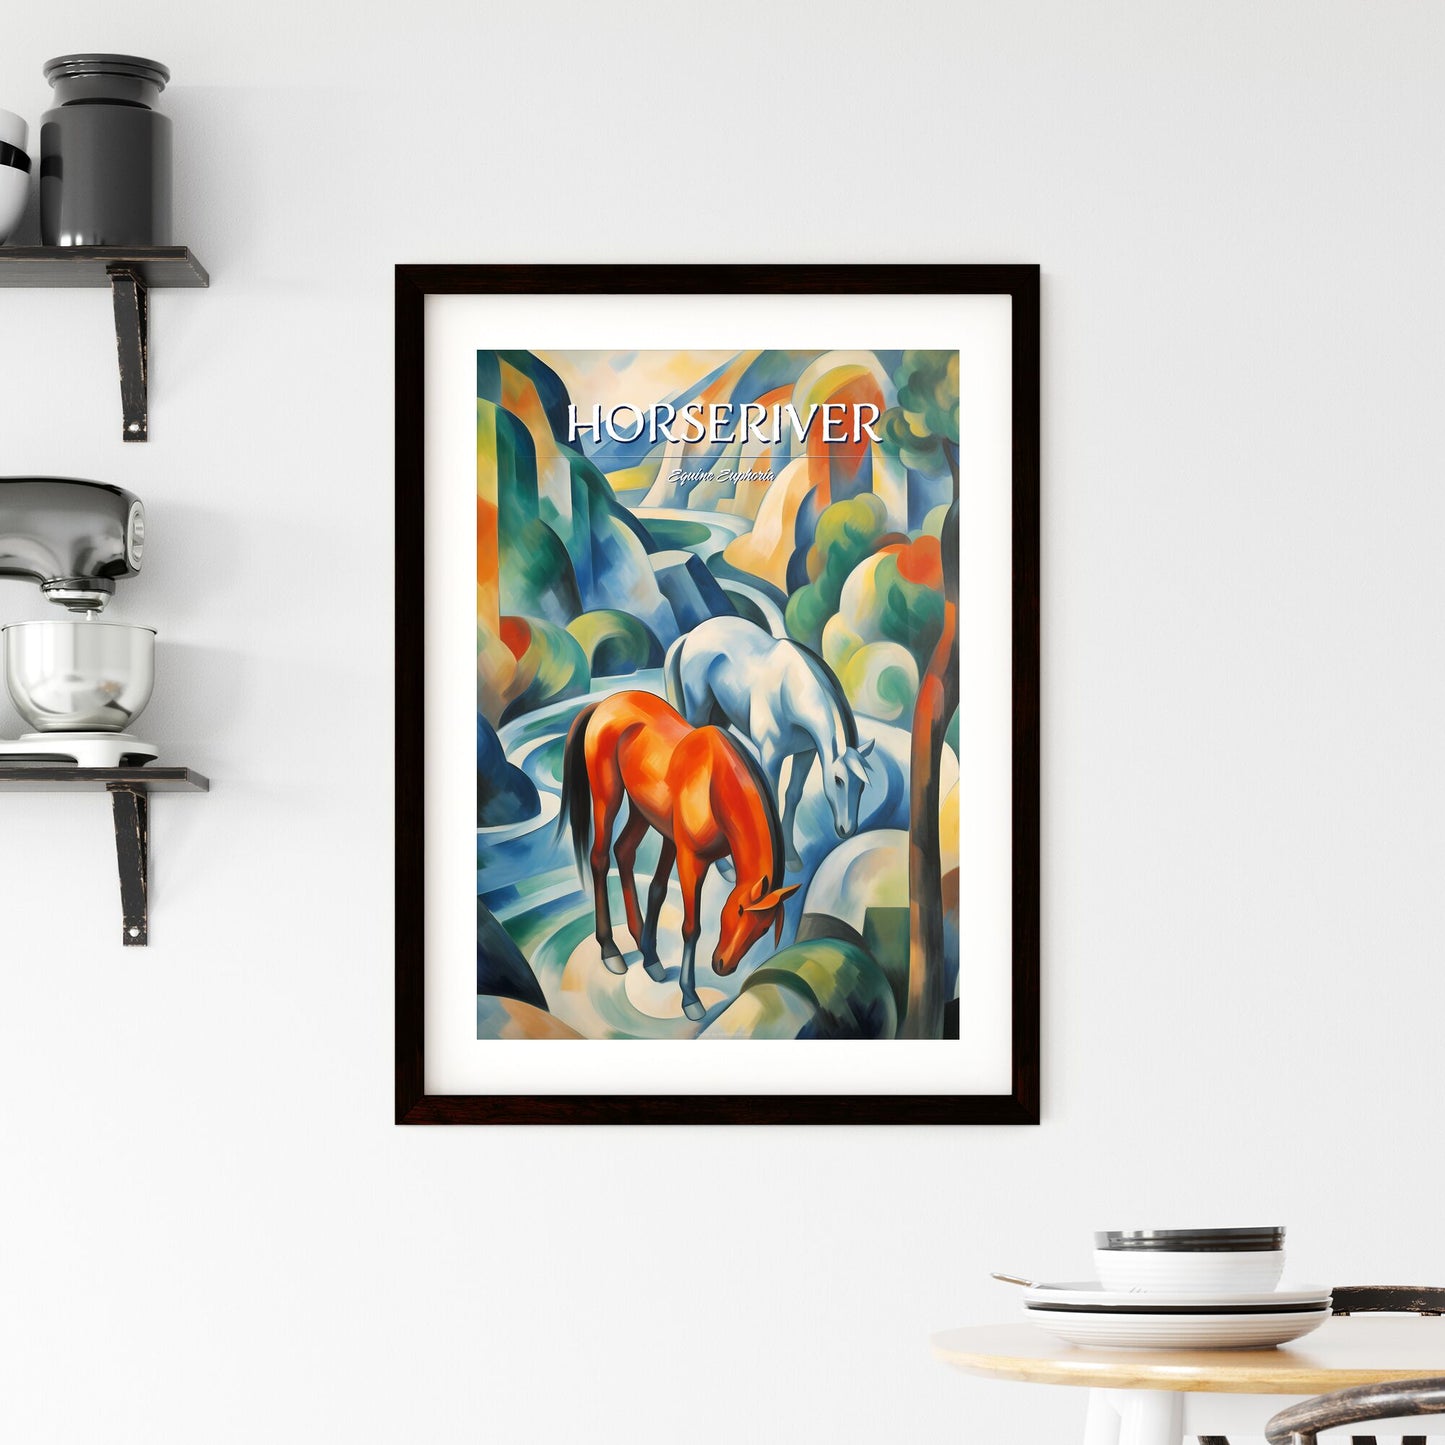 A Poster of if Franz Marc was a photographer - A Painting Of Horses In A River Default Title